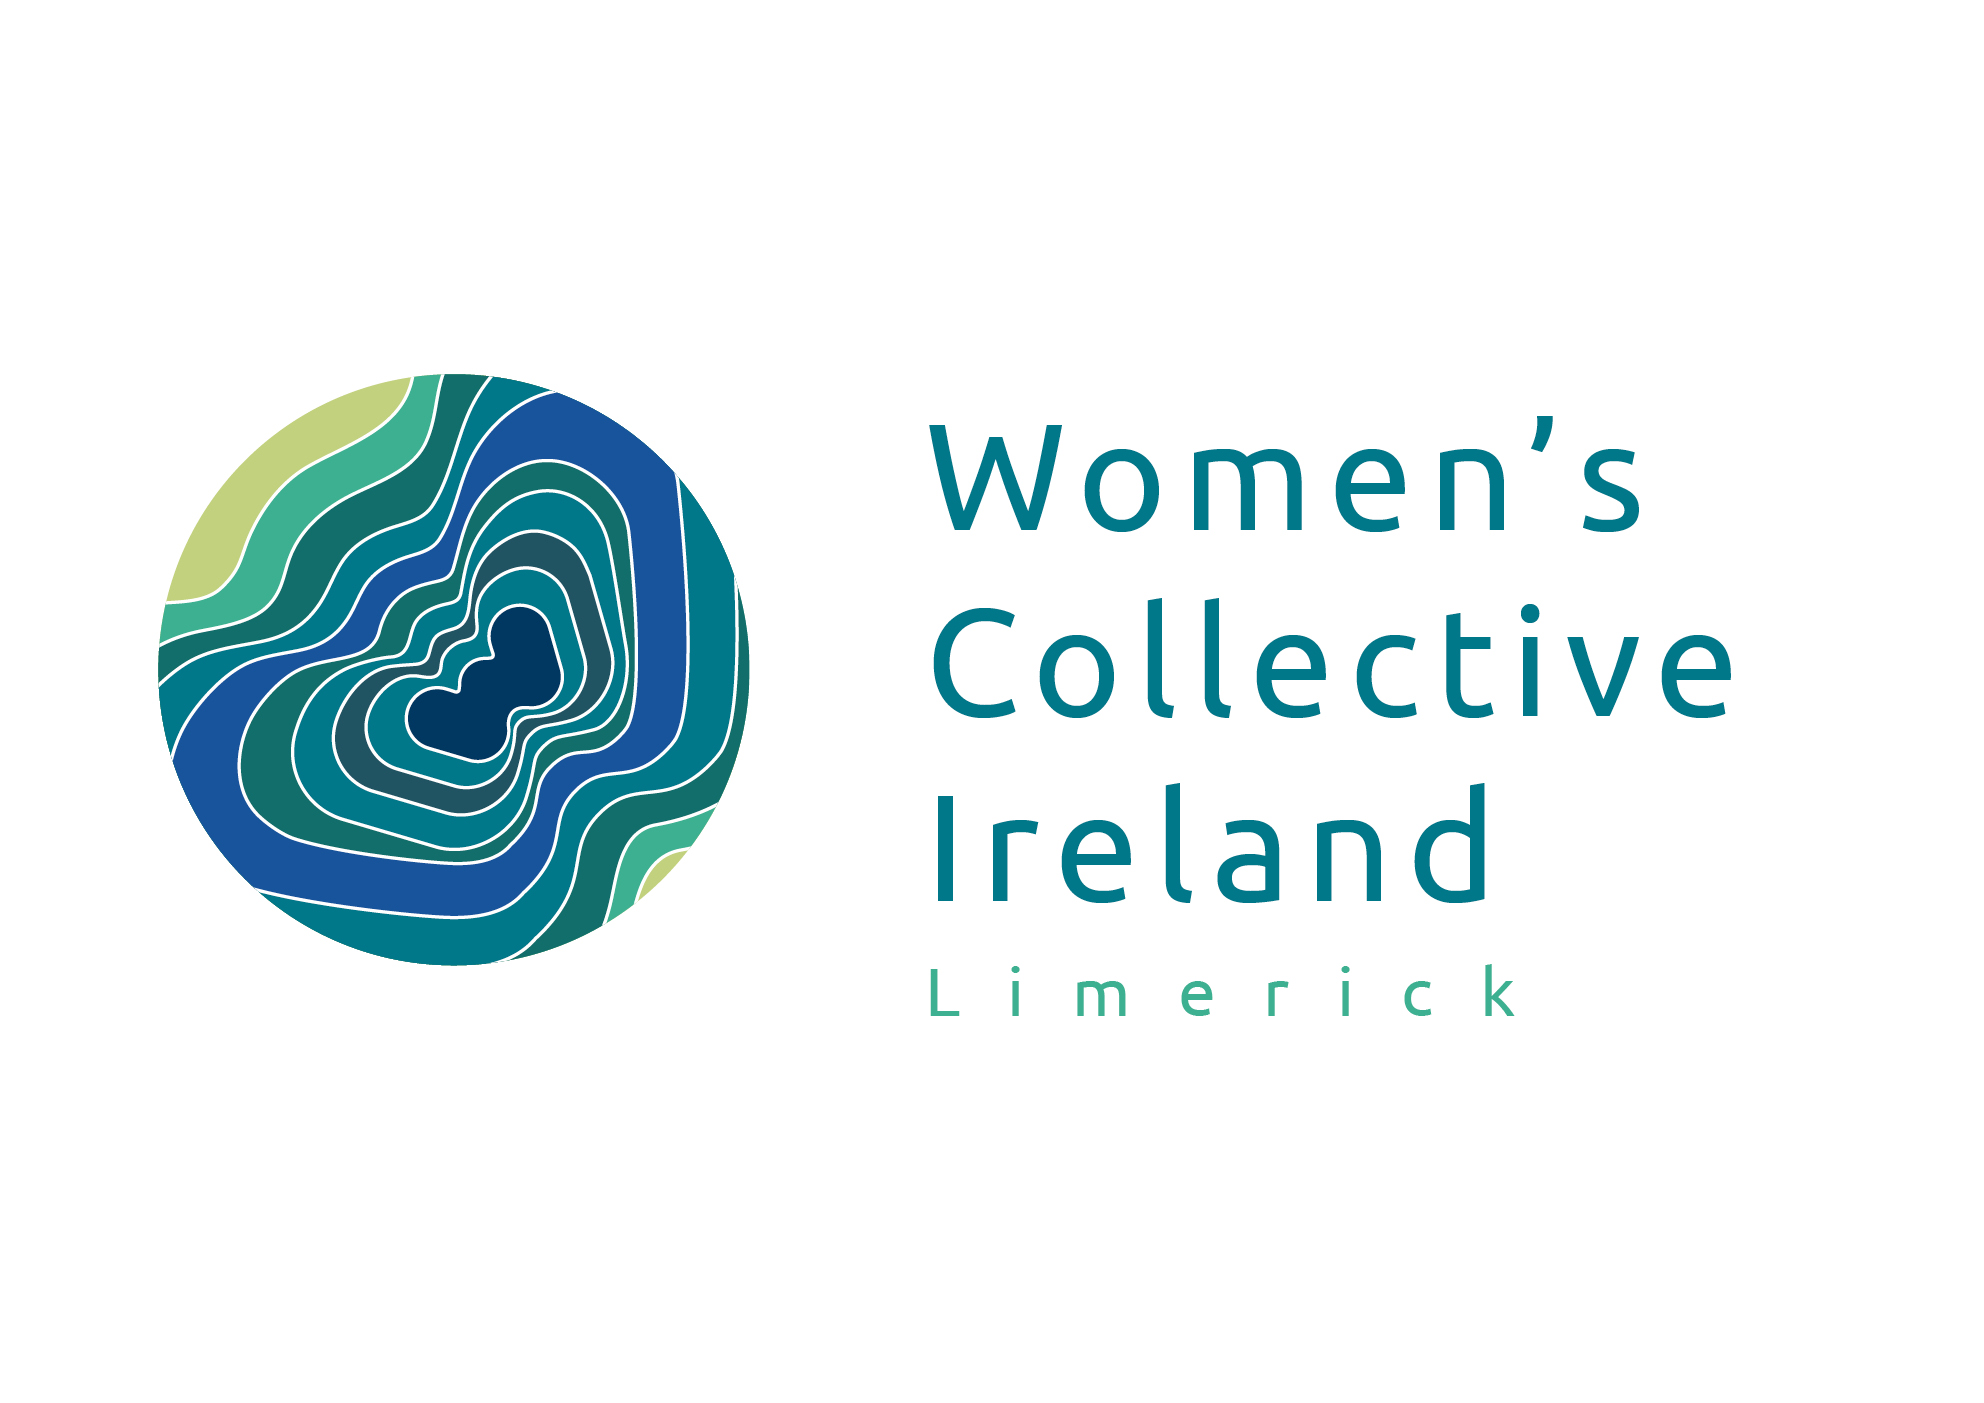 Womens Collective Ireland Limerick - WCI Limerick aims to promote gender equality through their work with women who experience multiple forms of oppression.